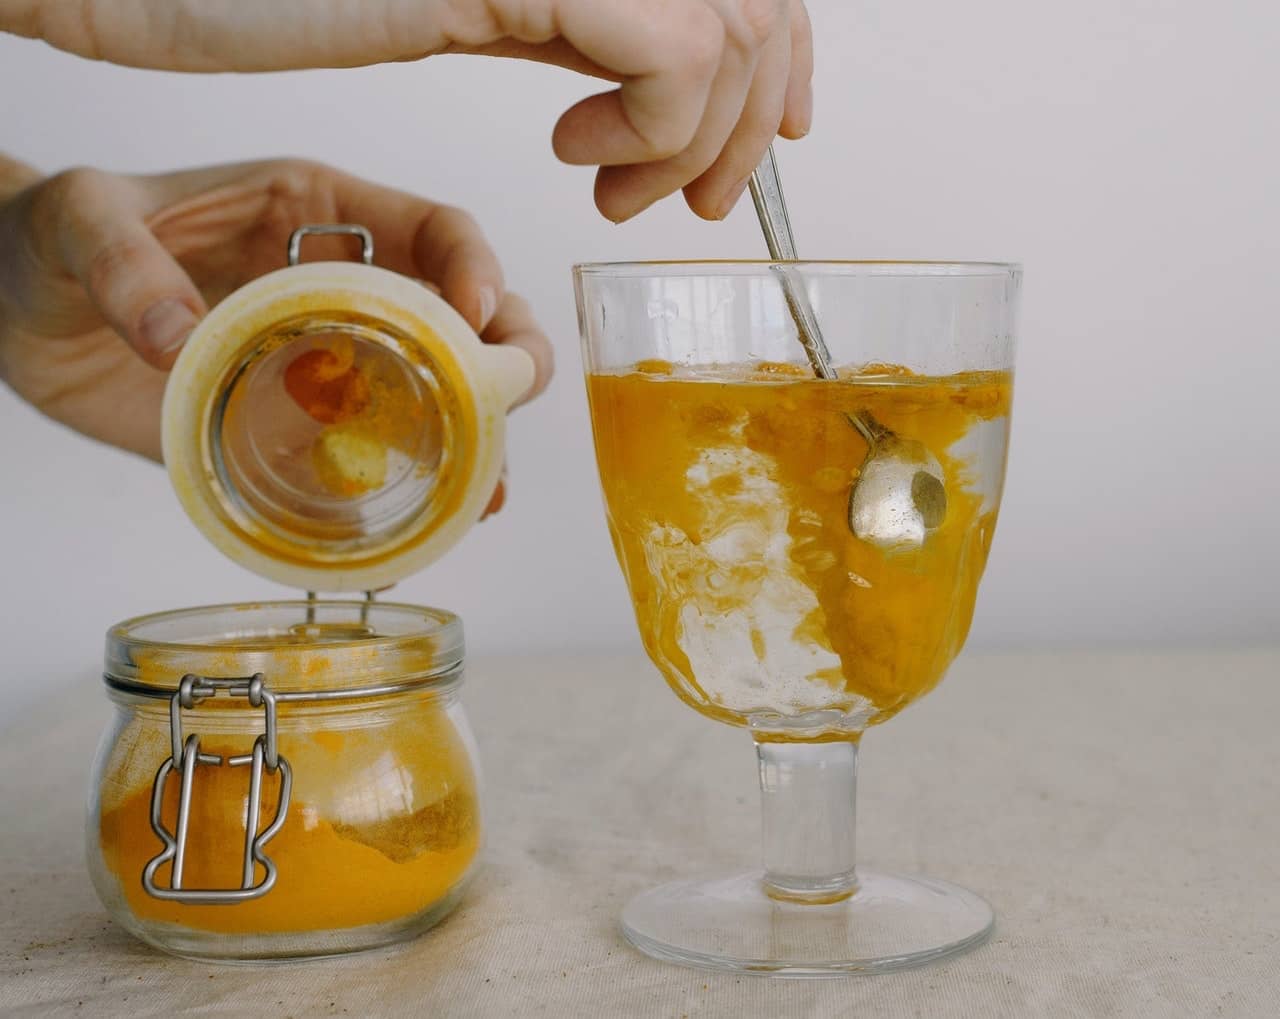 Crop hands adding turmeric in glass of hot water in morning